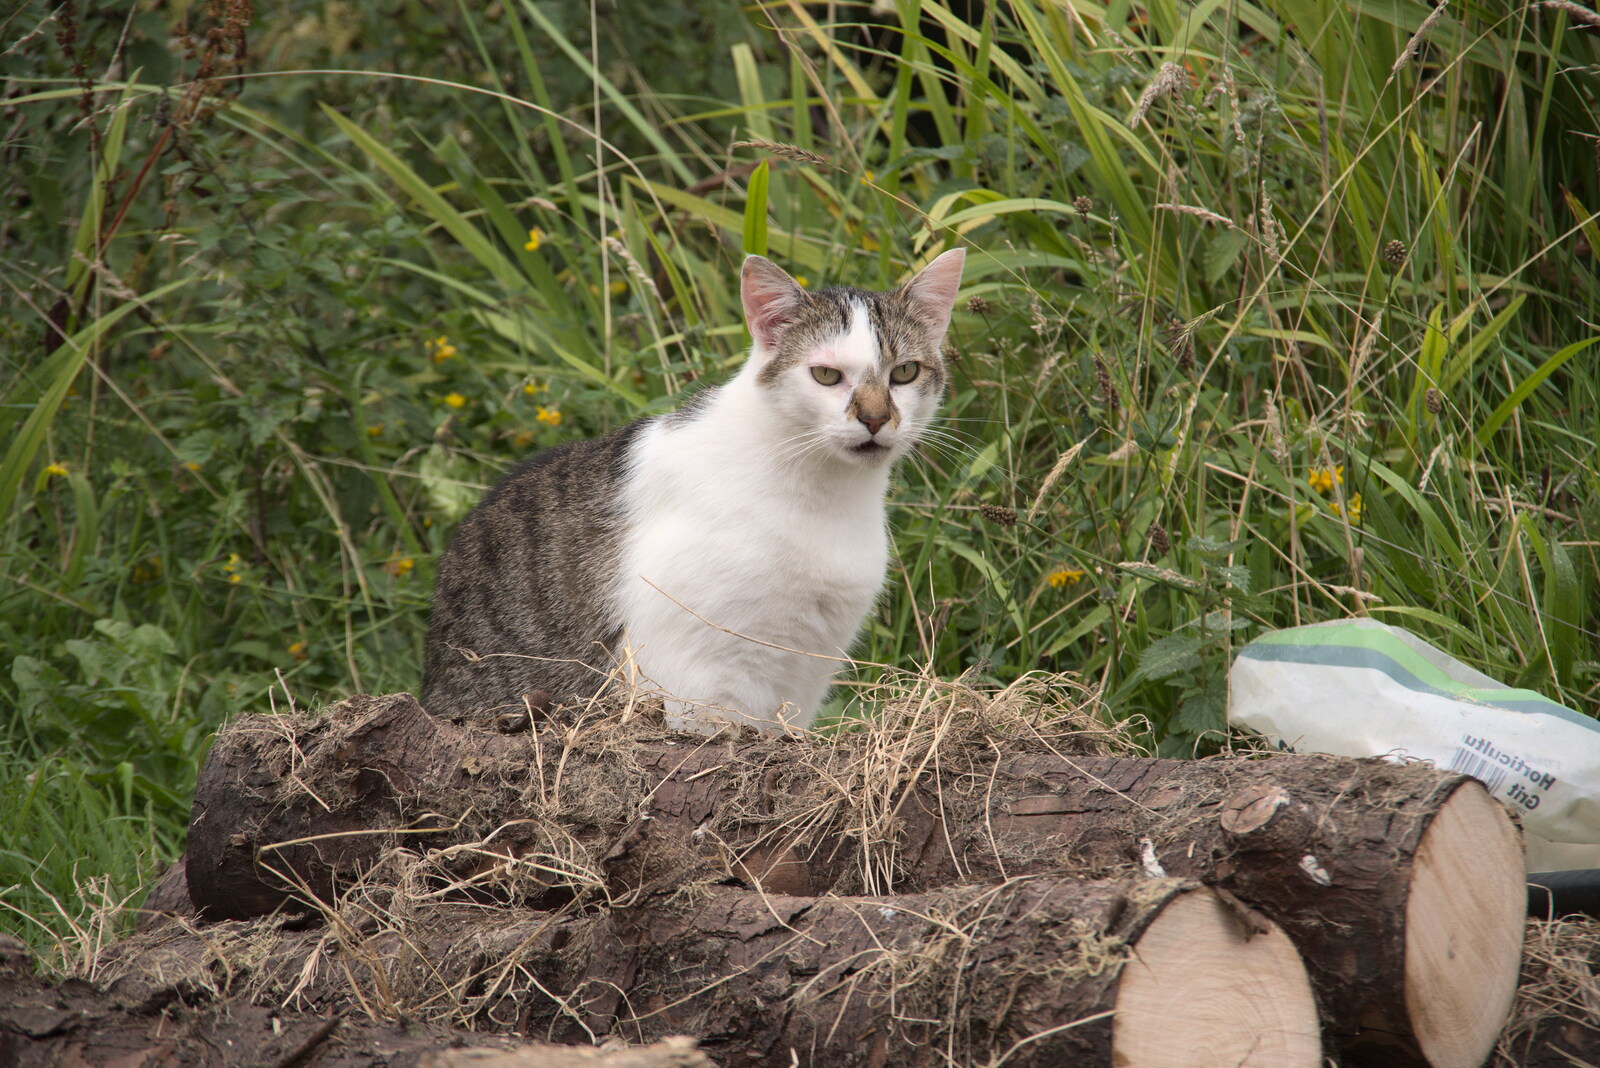 A Trip to Manorhamilton, County Leitrim, Ireland - 11th August 2021: A cat sits on logs and scowls